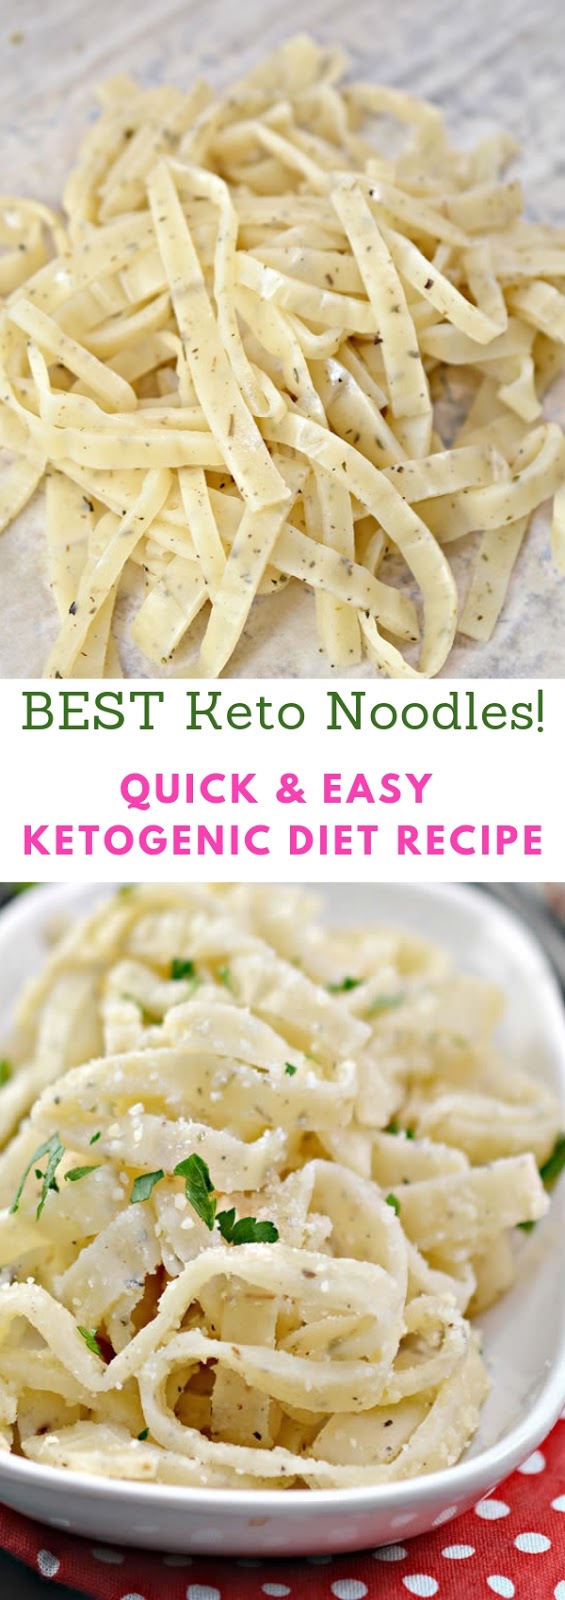 BEST Keto Noodles! - Quick & Easy Ketogenic Diet Recipe - Collection Of ...